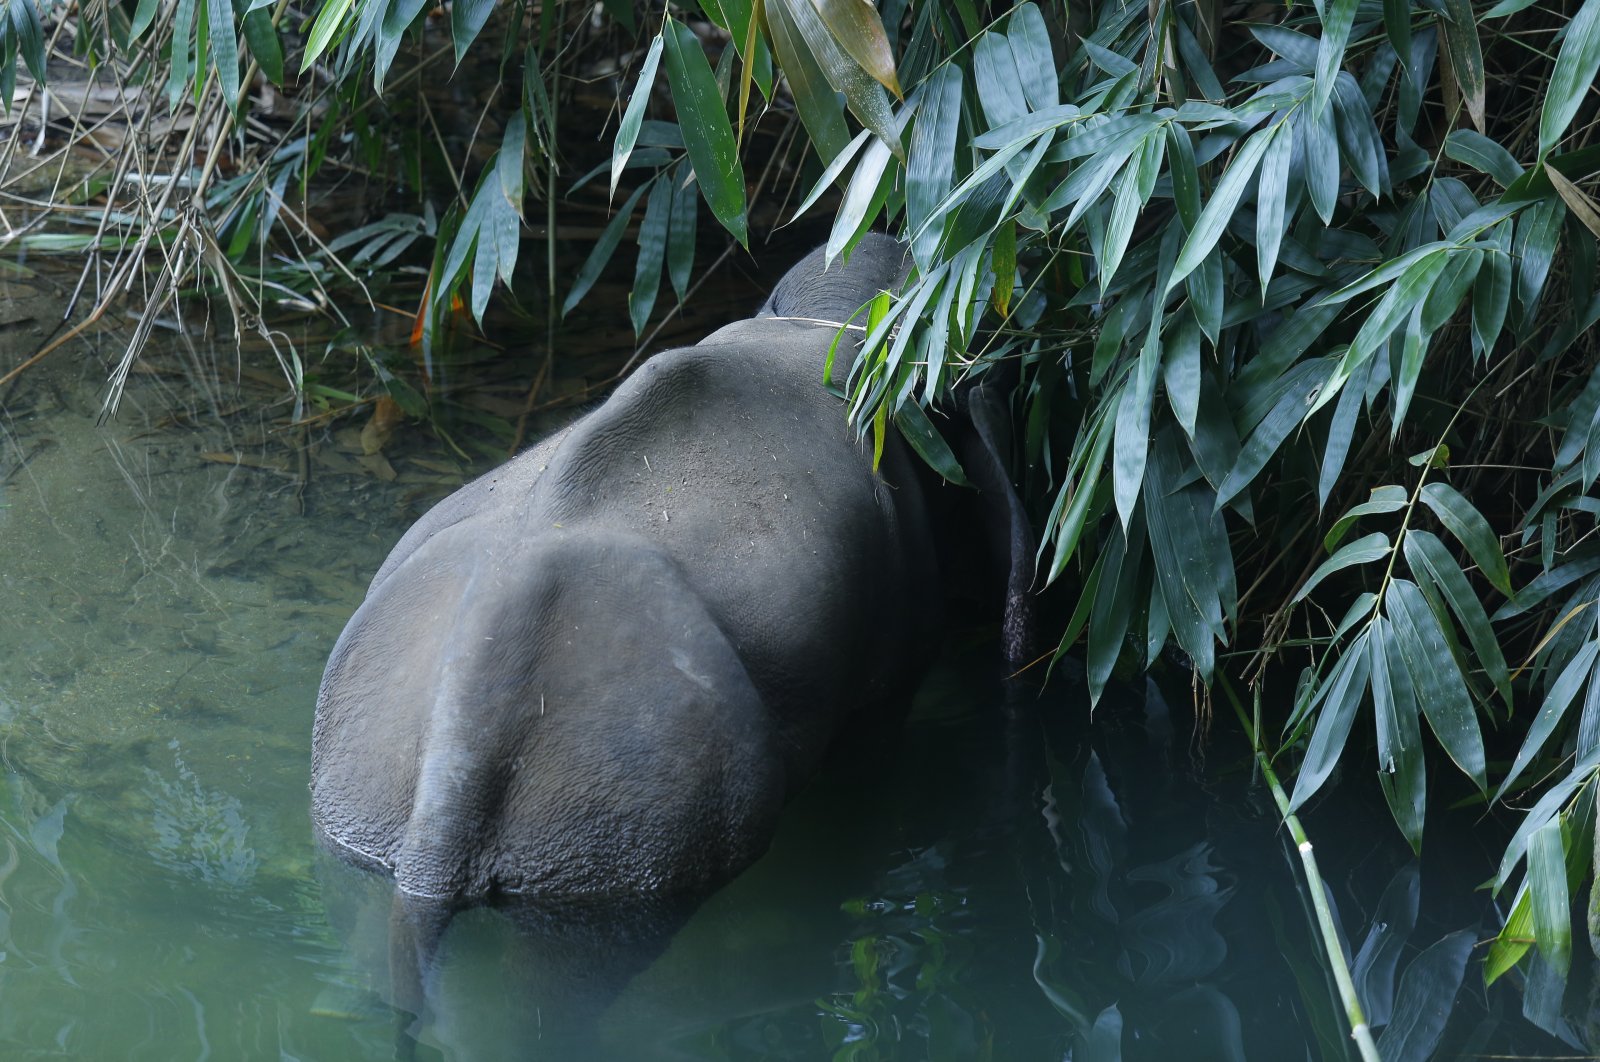 An injured 15-year-old pregnant wild elephant stands in Velliyar River moments before dying in the Palakkad district of Kerala state, India, May 27, 2020. (AP Photo)